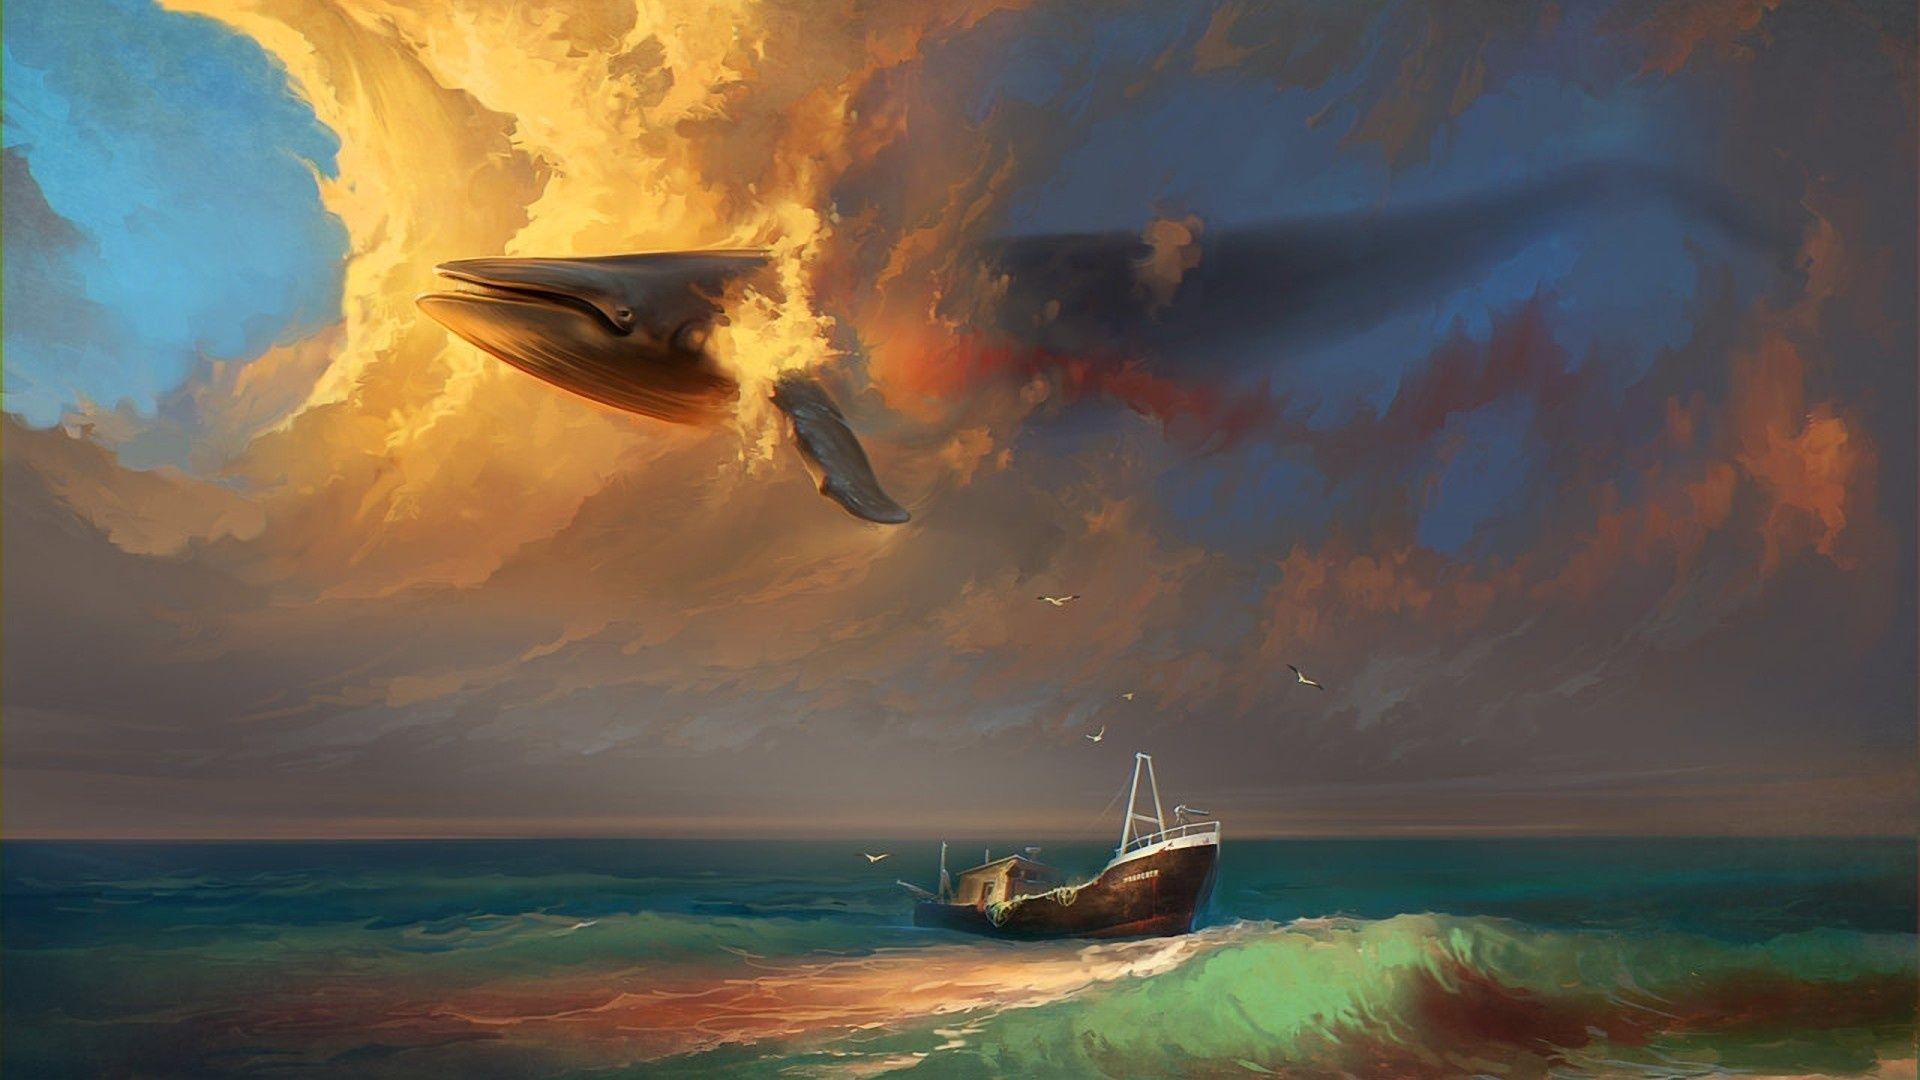 1920x1080 Artistic Psychedelic Surrealism Trippy Surreal Whale Ship Wallpaper | Digital painting, Whale art, Cloud painting